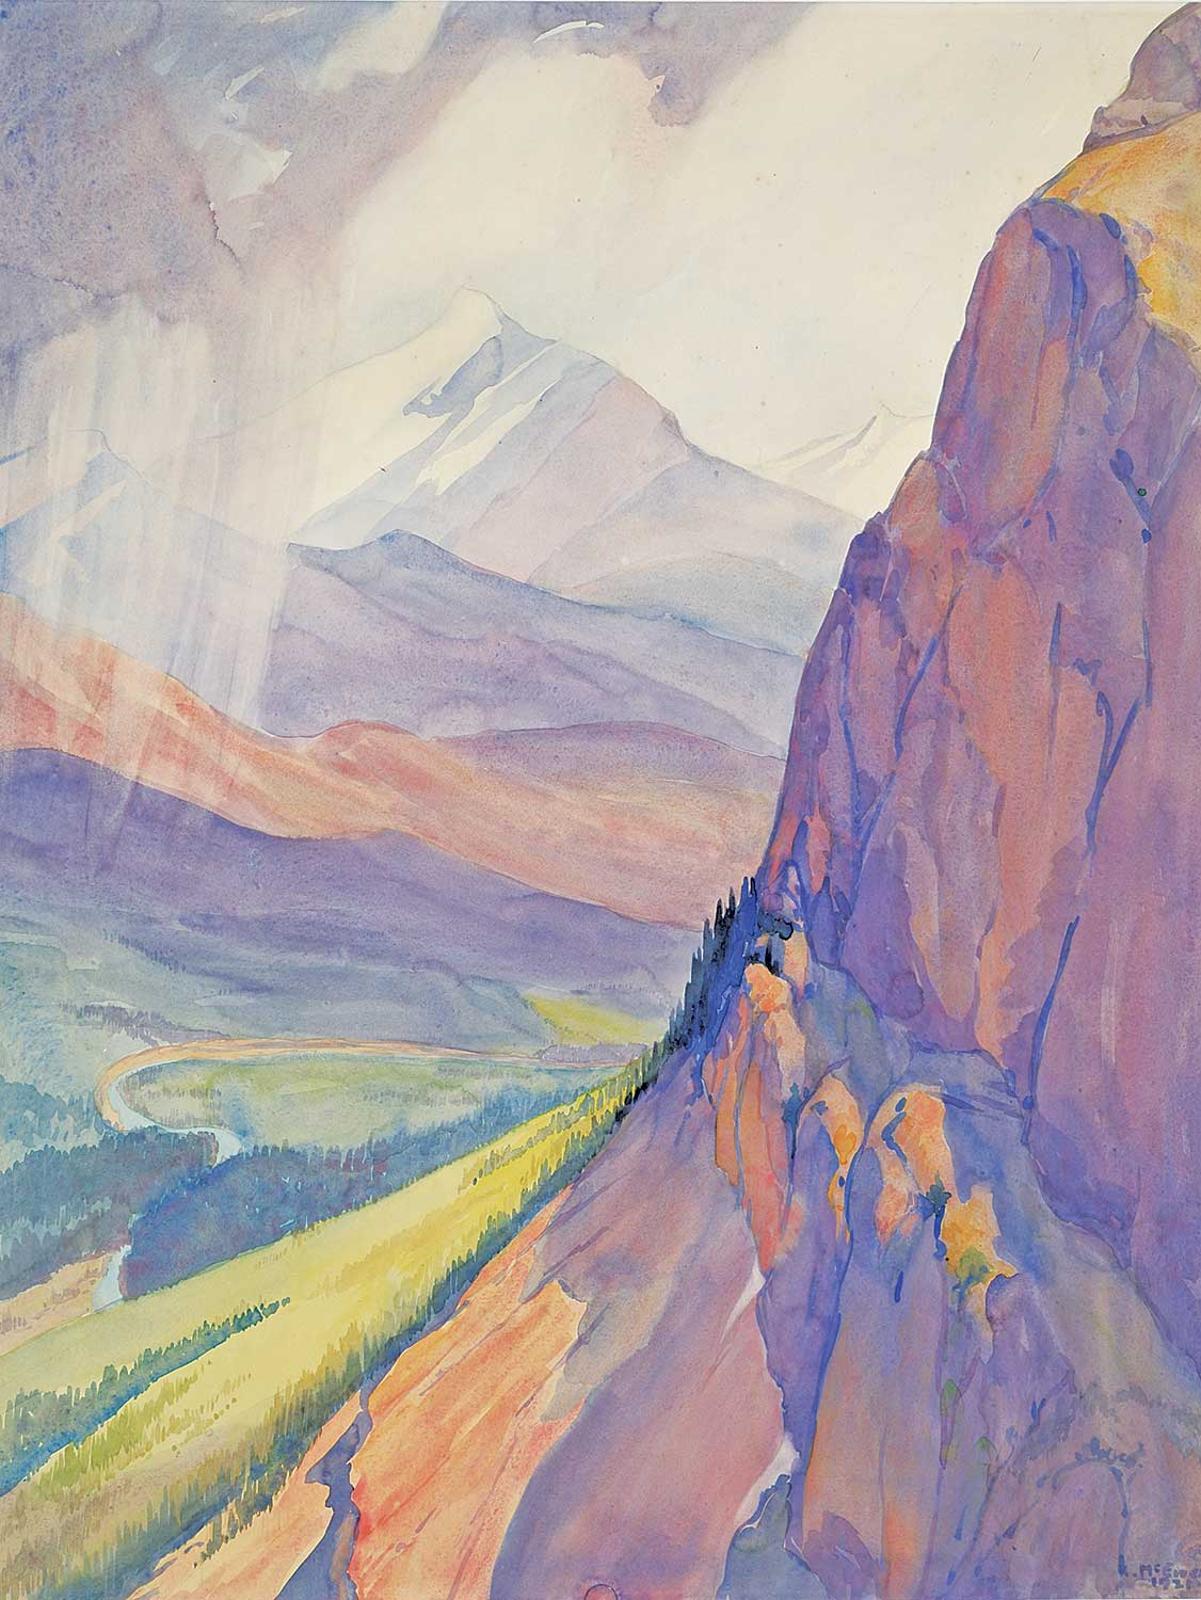 Katherine Sibley McEwen (1875-1945) - Untitled - In the Mountains